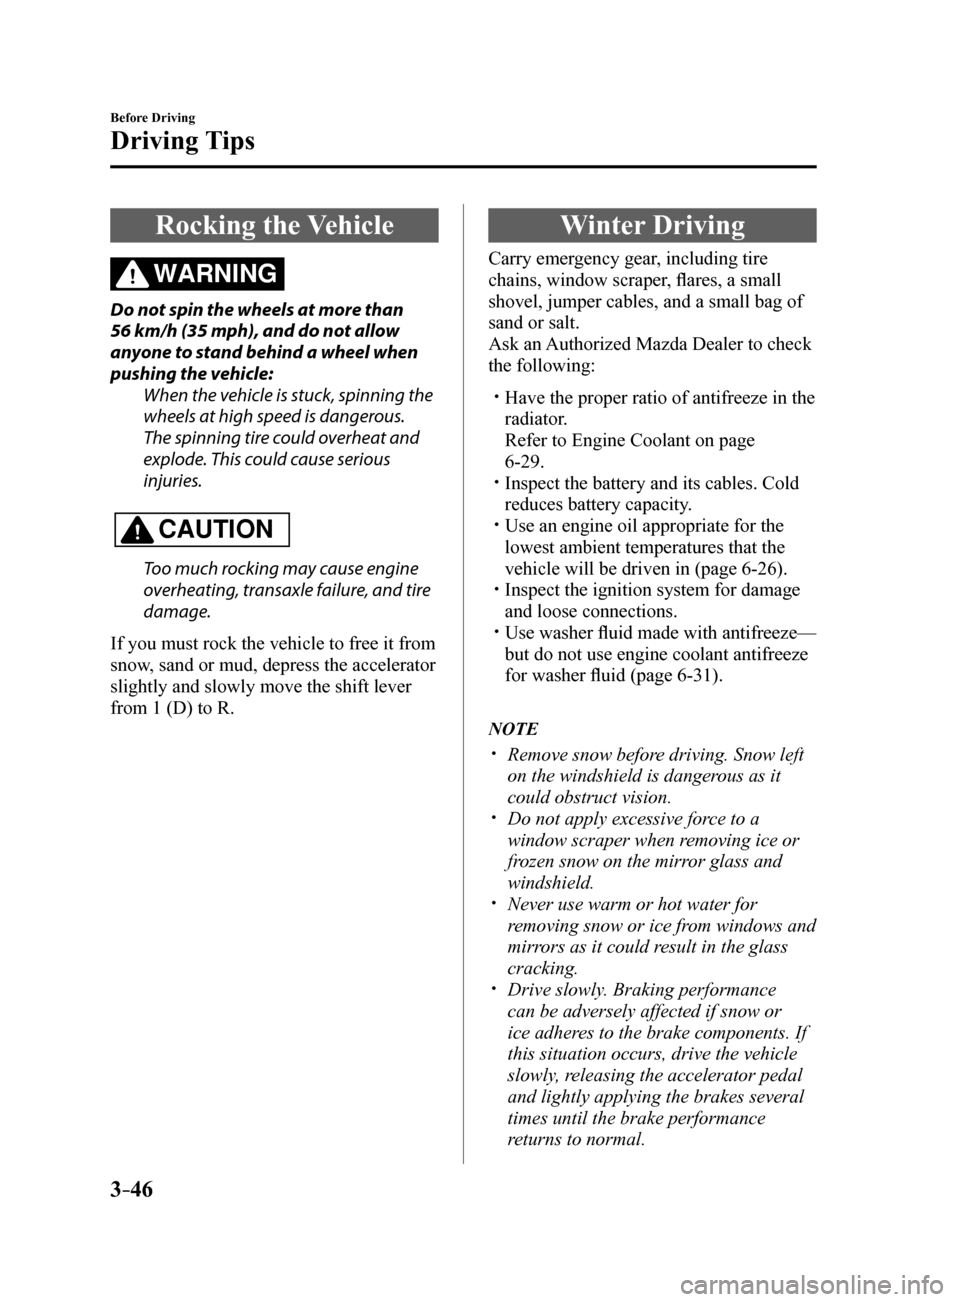 MAZDA MODEL 6 2017  Owners Manual (in English) 3–46
Before Driving
Driving Tips
Rocking the Vehicle
WARNING
Do not spin the wheels at more than 
56 km/h (35 mph), and do not allow 
anyone to stand behind a wheel when 
pushing the vehicle:When th